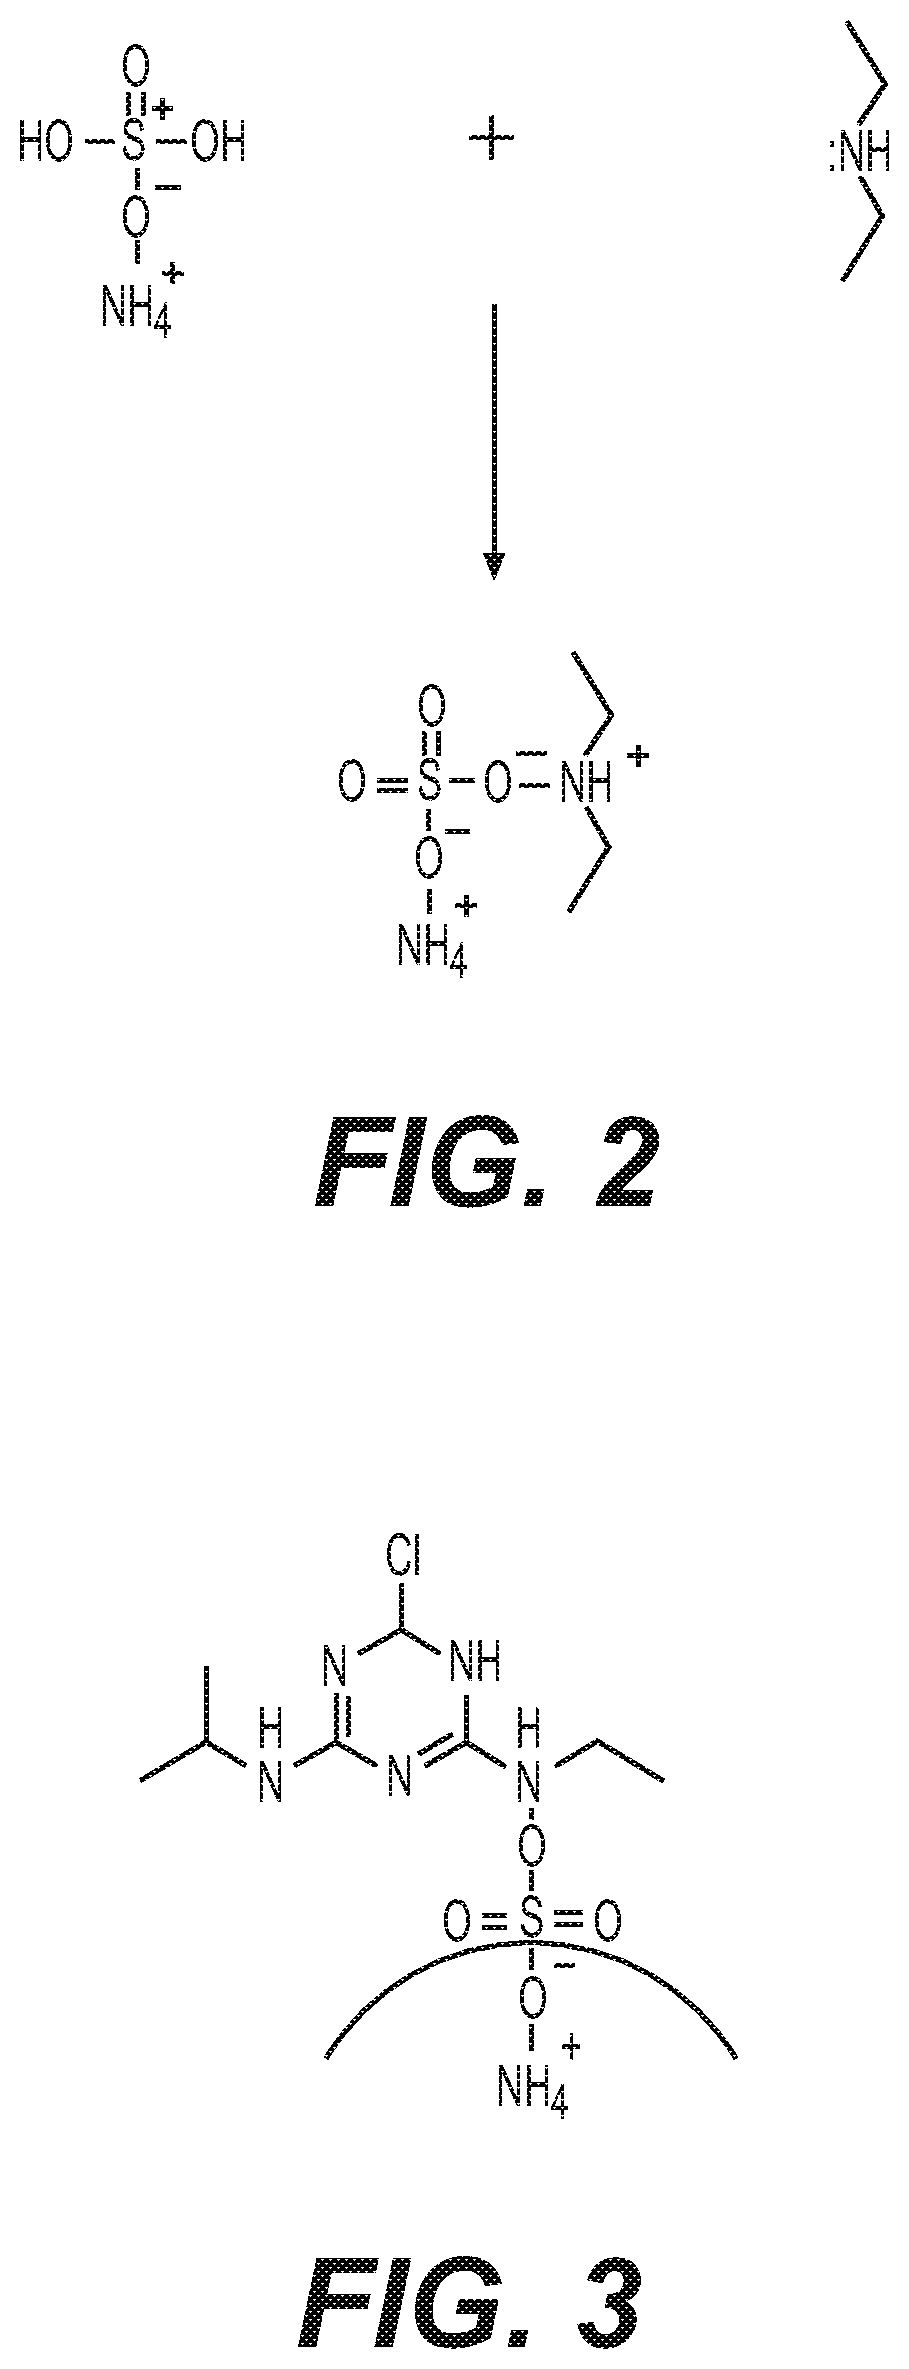 Delivery of Bioactive Molecules in Coatings or Surface Layers of Organically Enhanced Inorganic Fertilizers